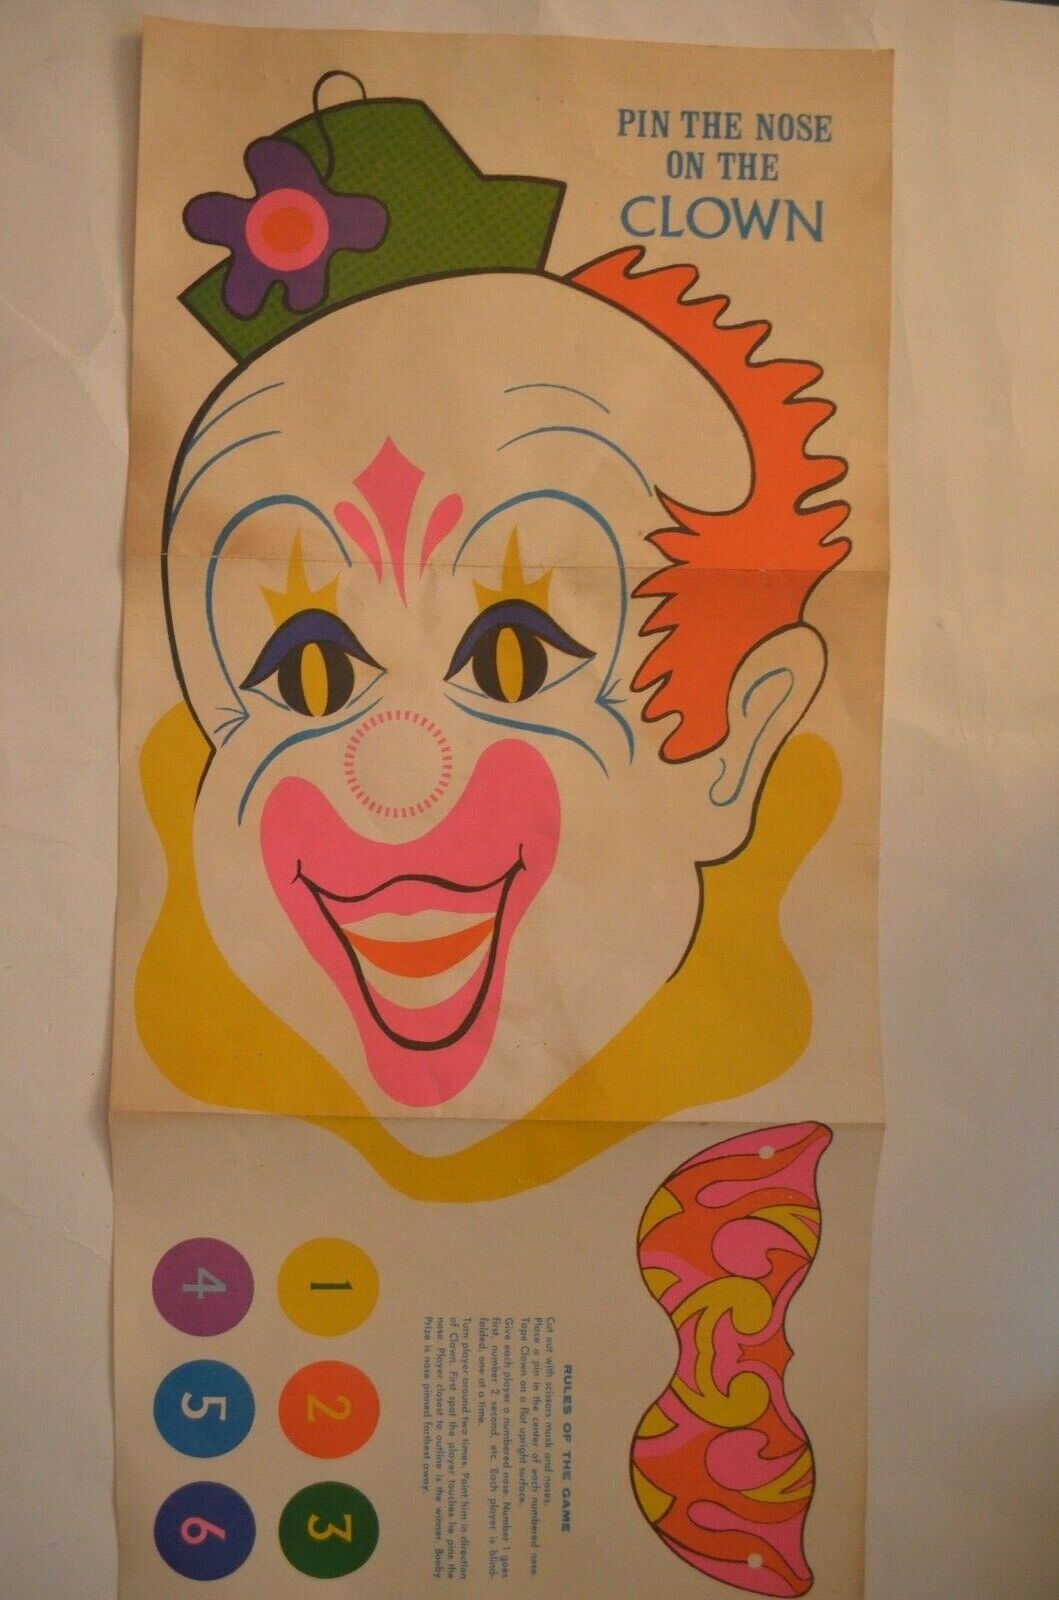 Vintage “Scary” Pin The Nose On The Clown Fold-Out Poster